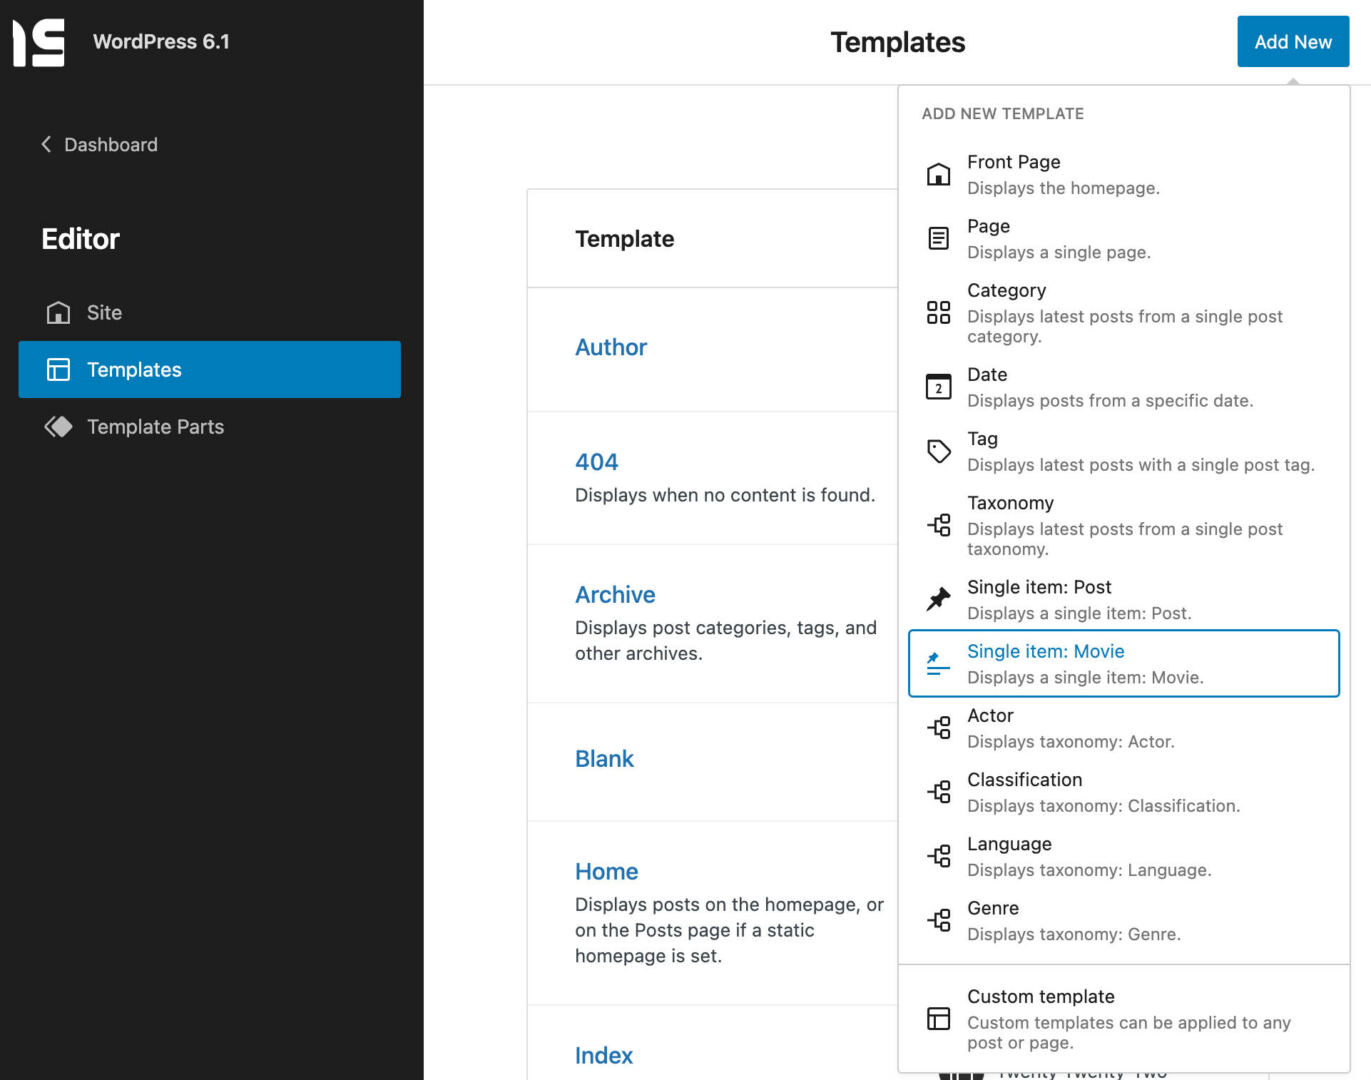 An image showing a list of templates types available in WordPress 6.1